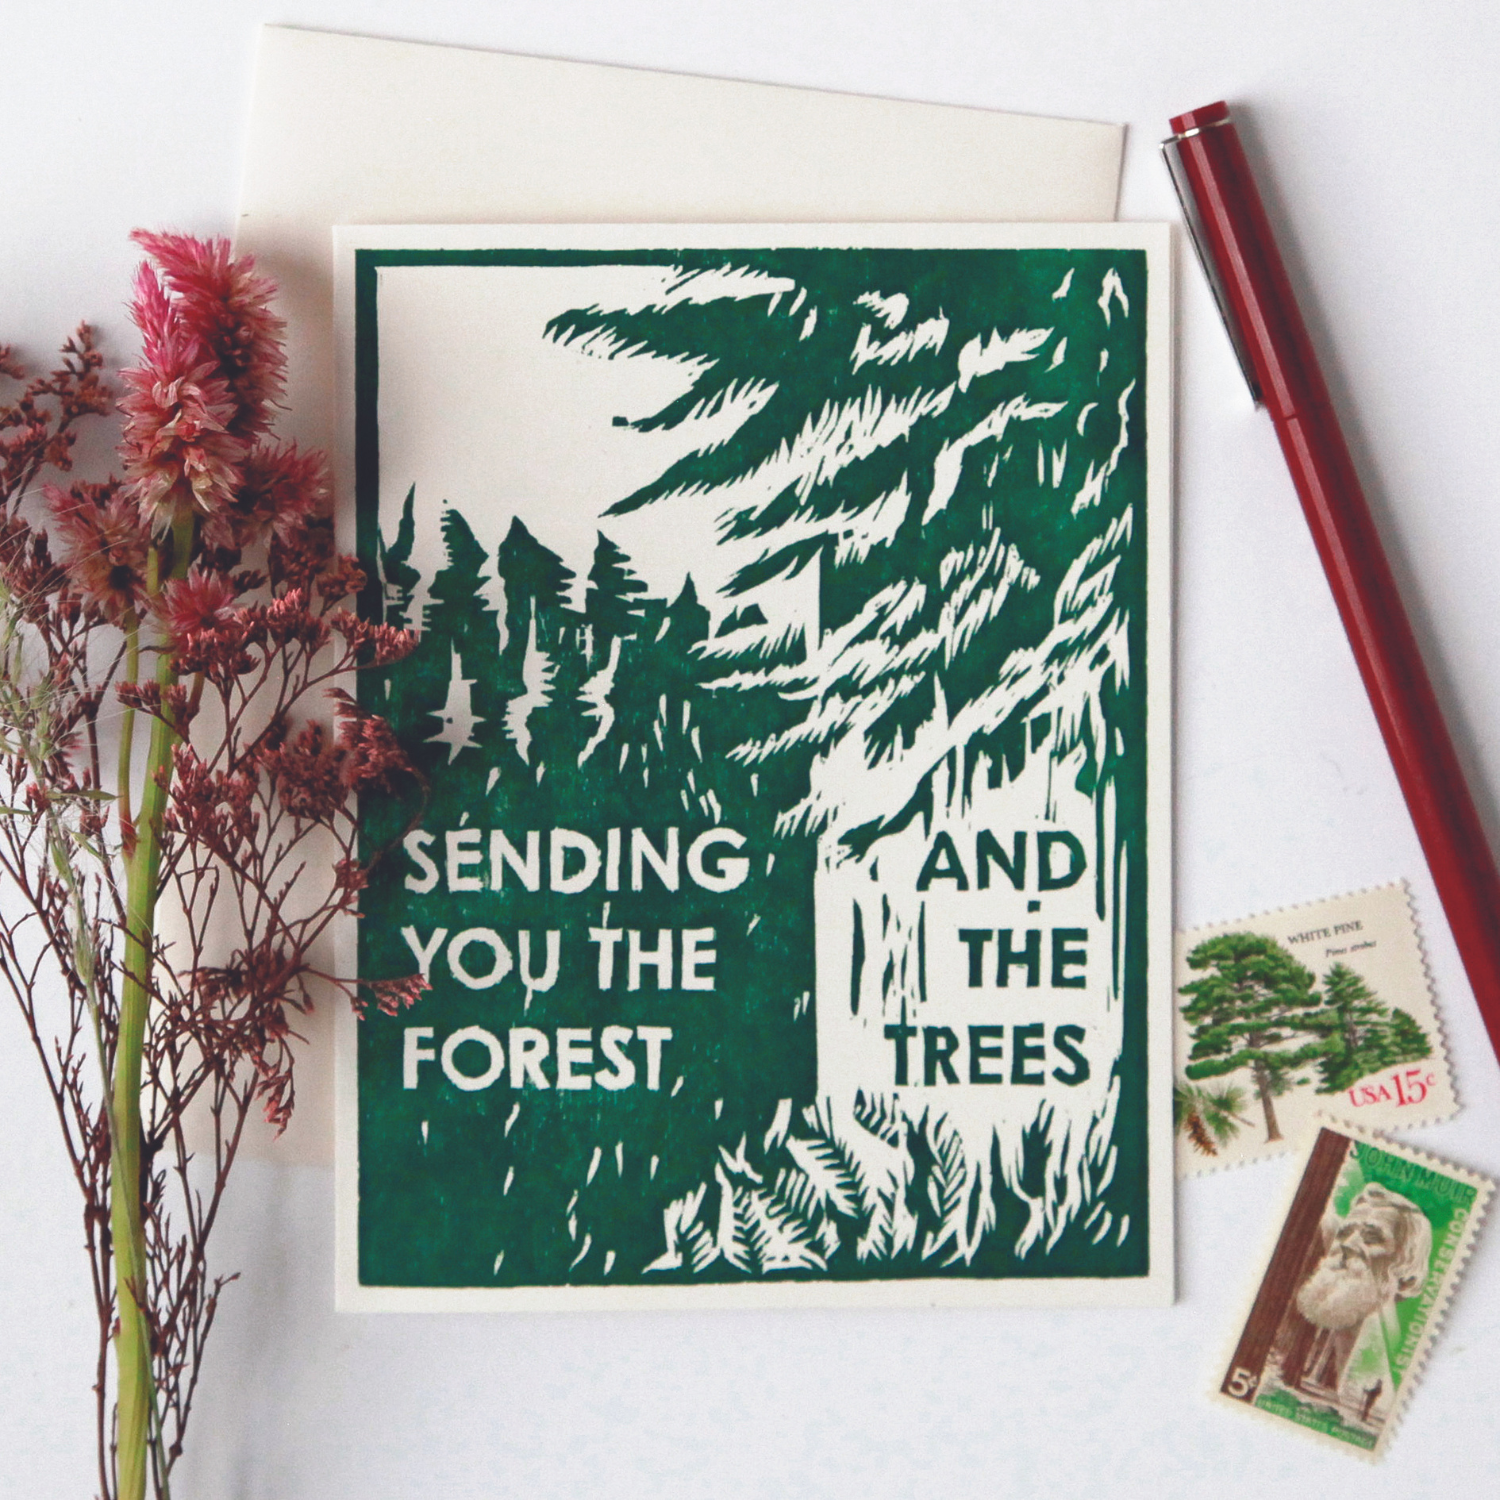 Sending you the forest and the trees letterpress card